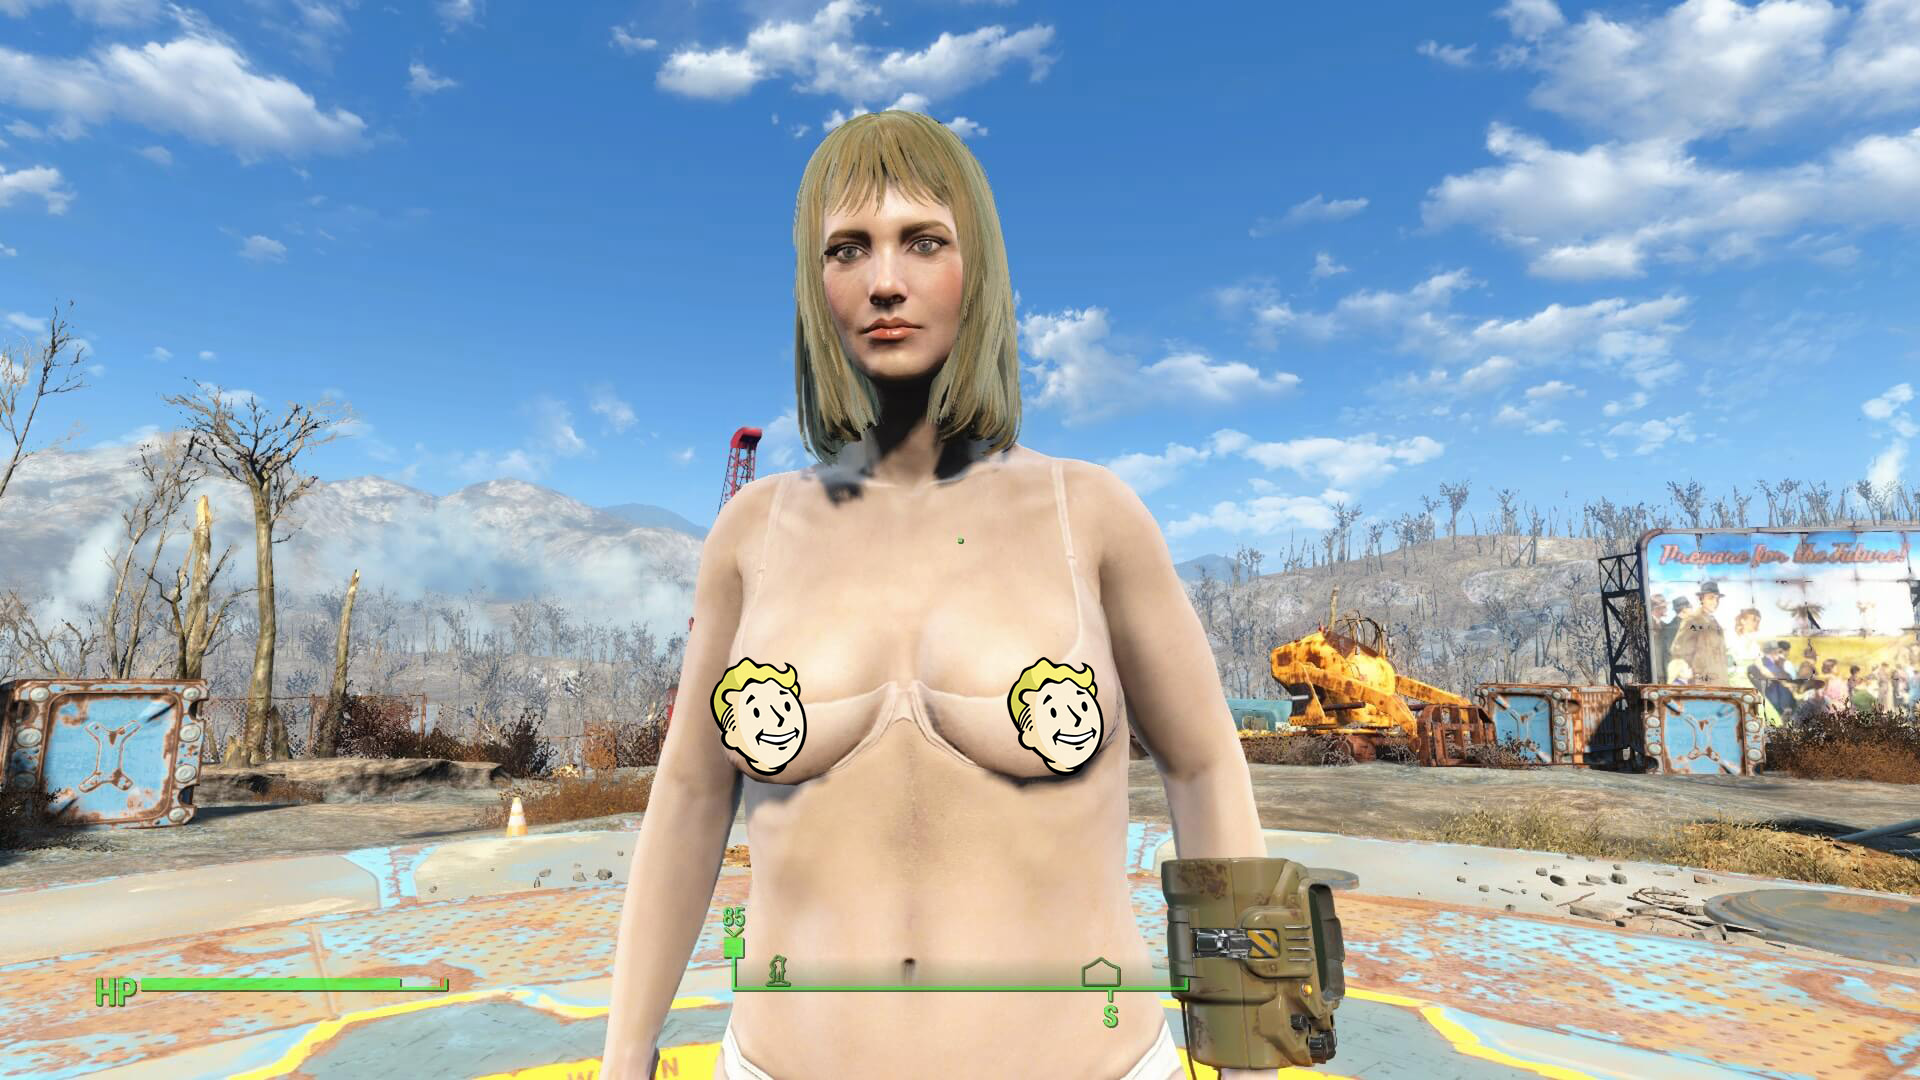 Fallout 4 Xbox One Mod Under Armor, find more porn picture s ya lograron cr...